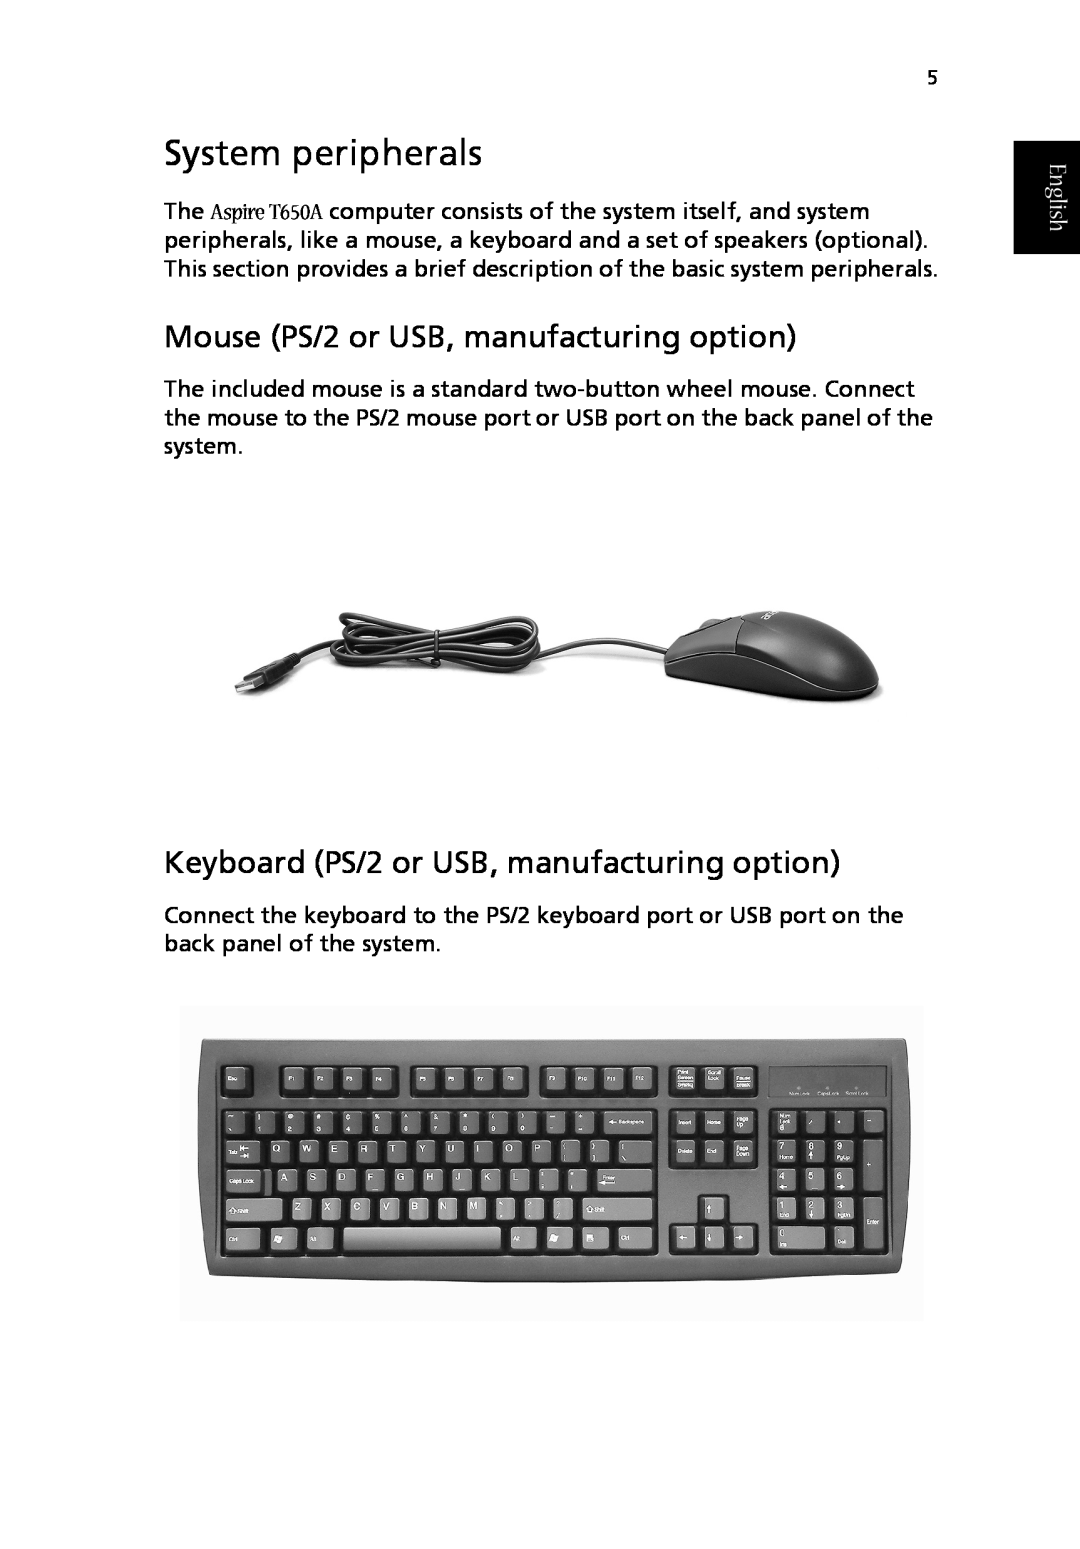 Acer T650A manual System peripherals, Mouse PS/2 or USB, manufacturing option, Keyboard PS/2 or USB, manufacturing option 